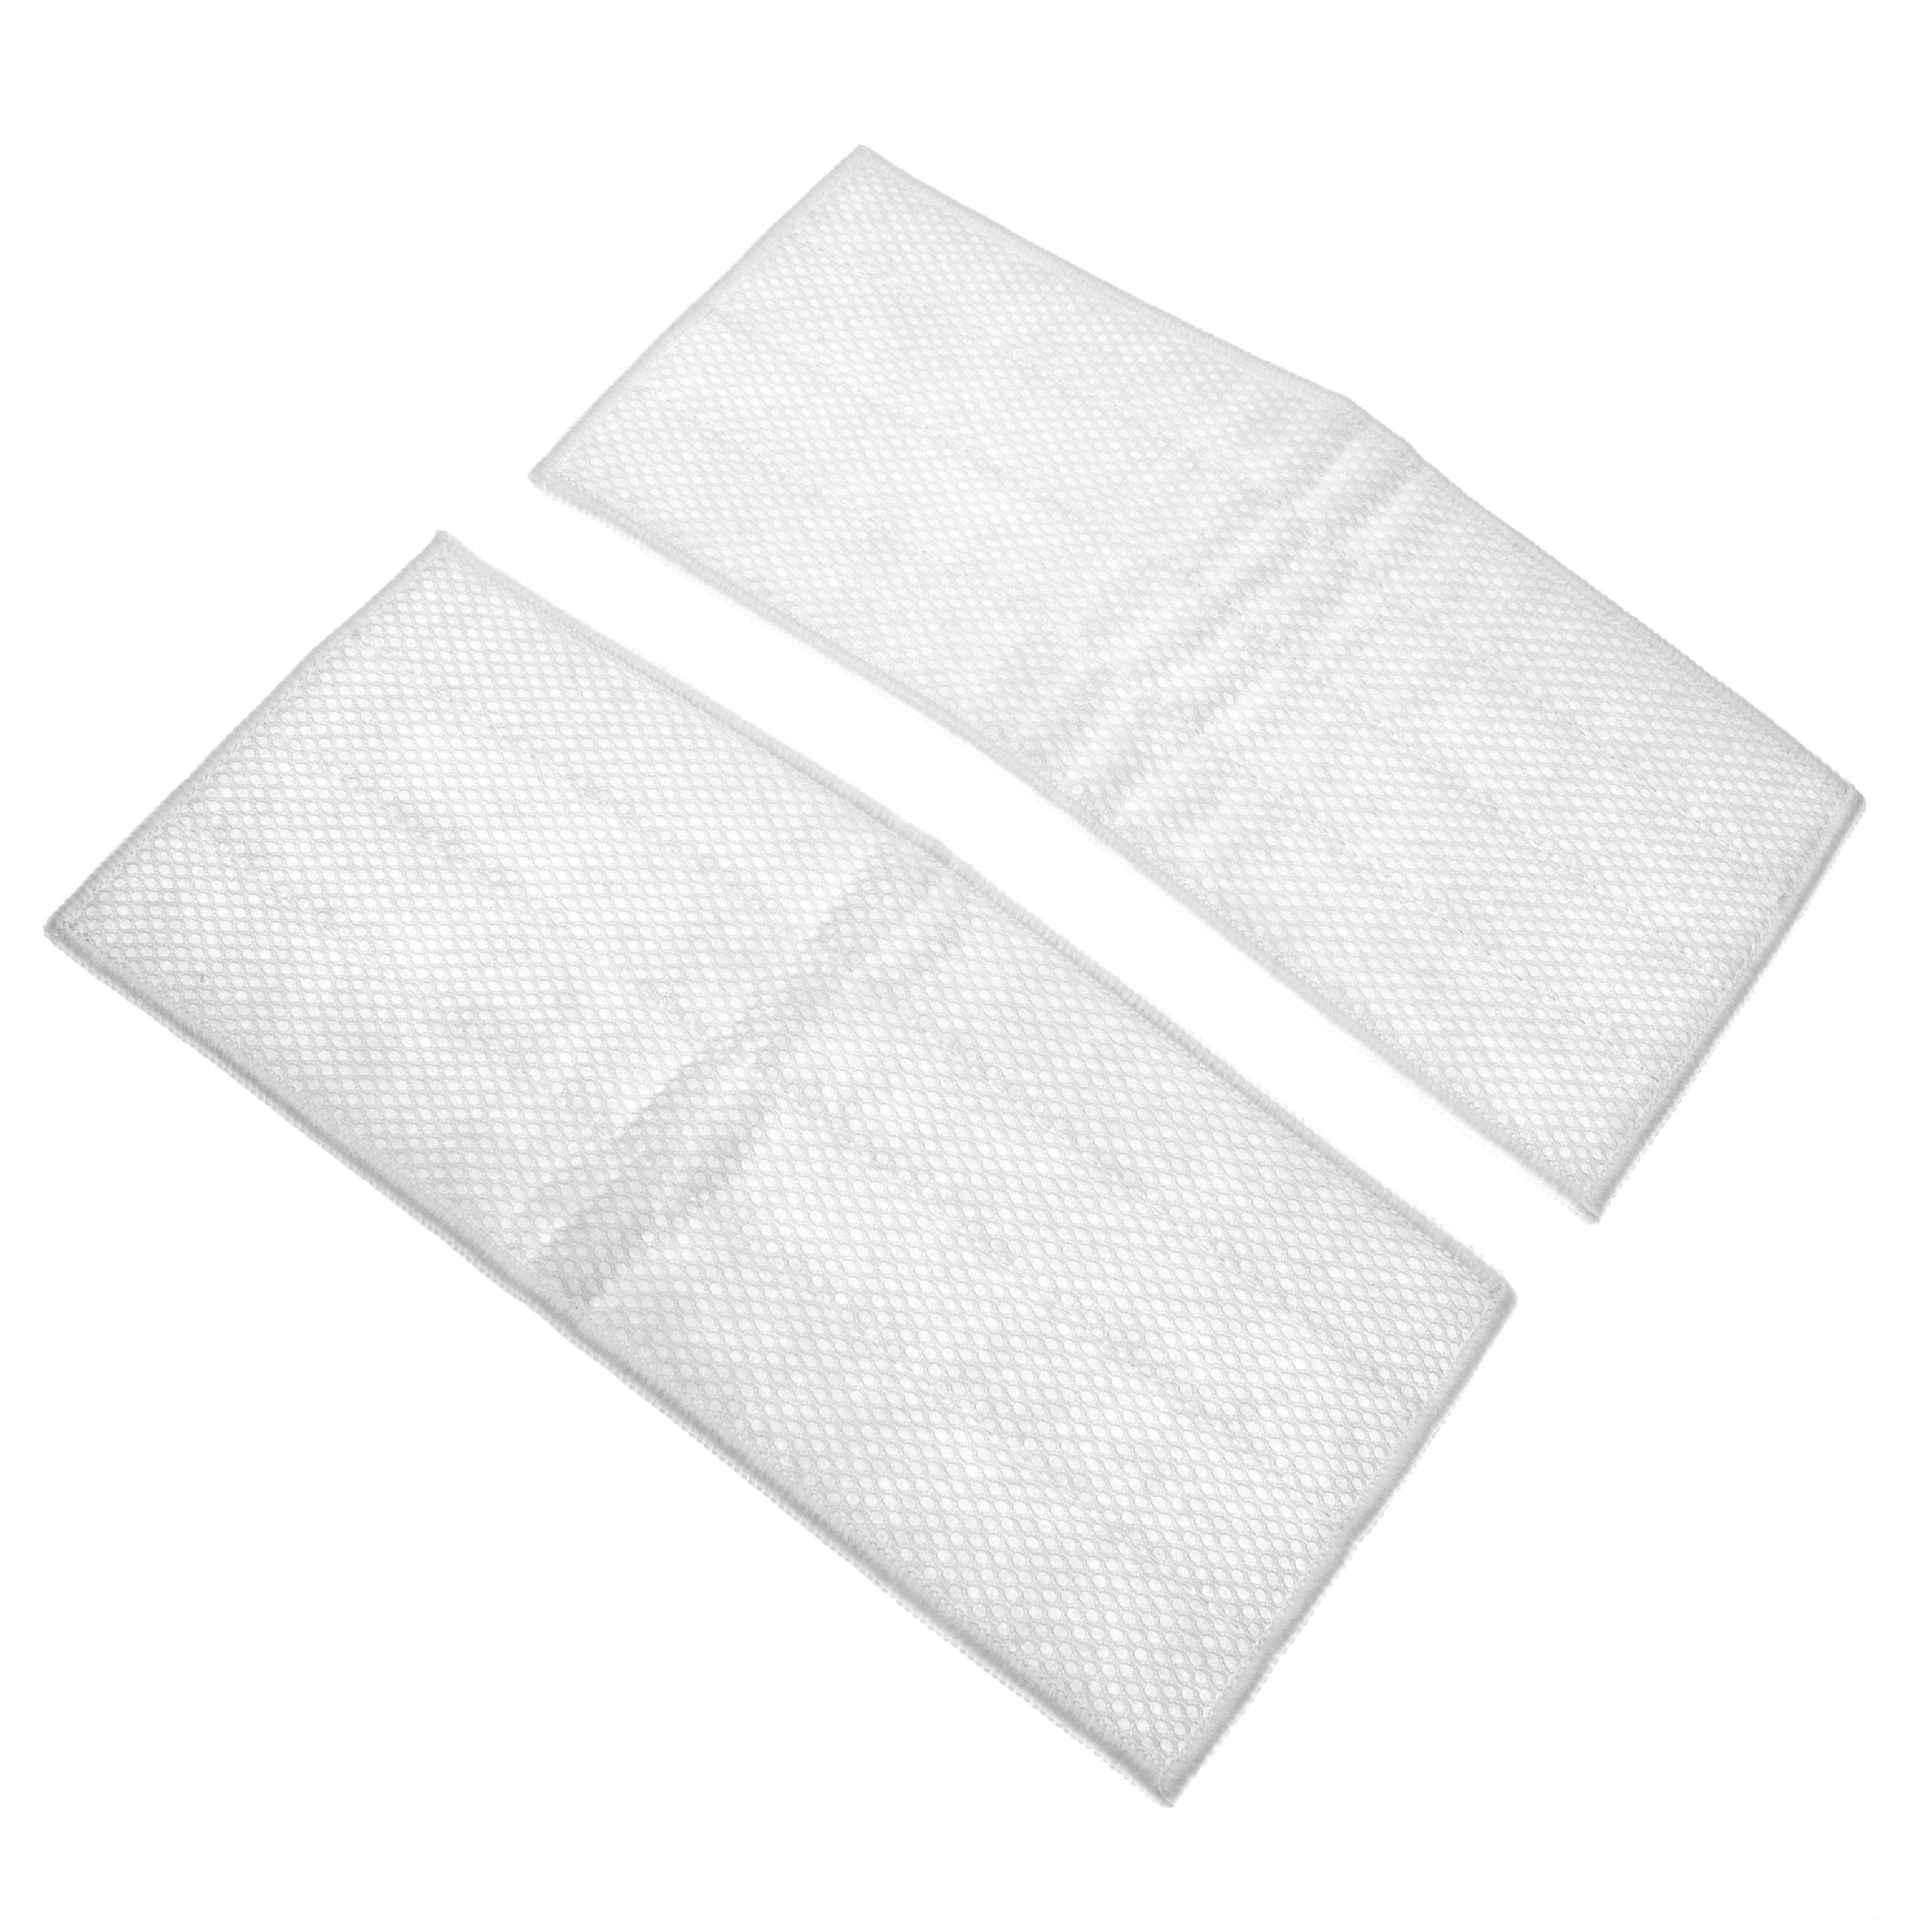 2x Cover Scrubber Sleeve replaces Kärcher 2.633-132.0 for Kärcher Window Cleaner Squeegee